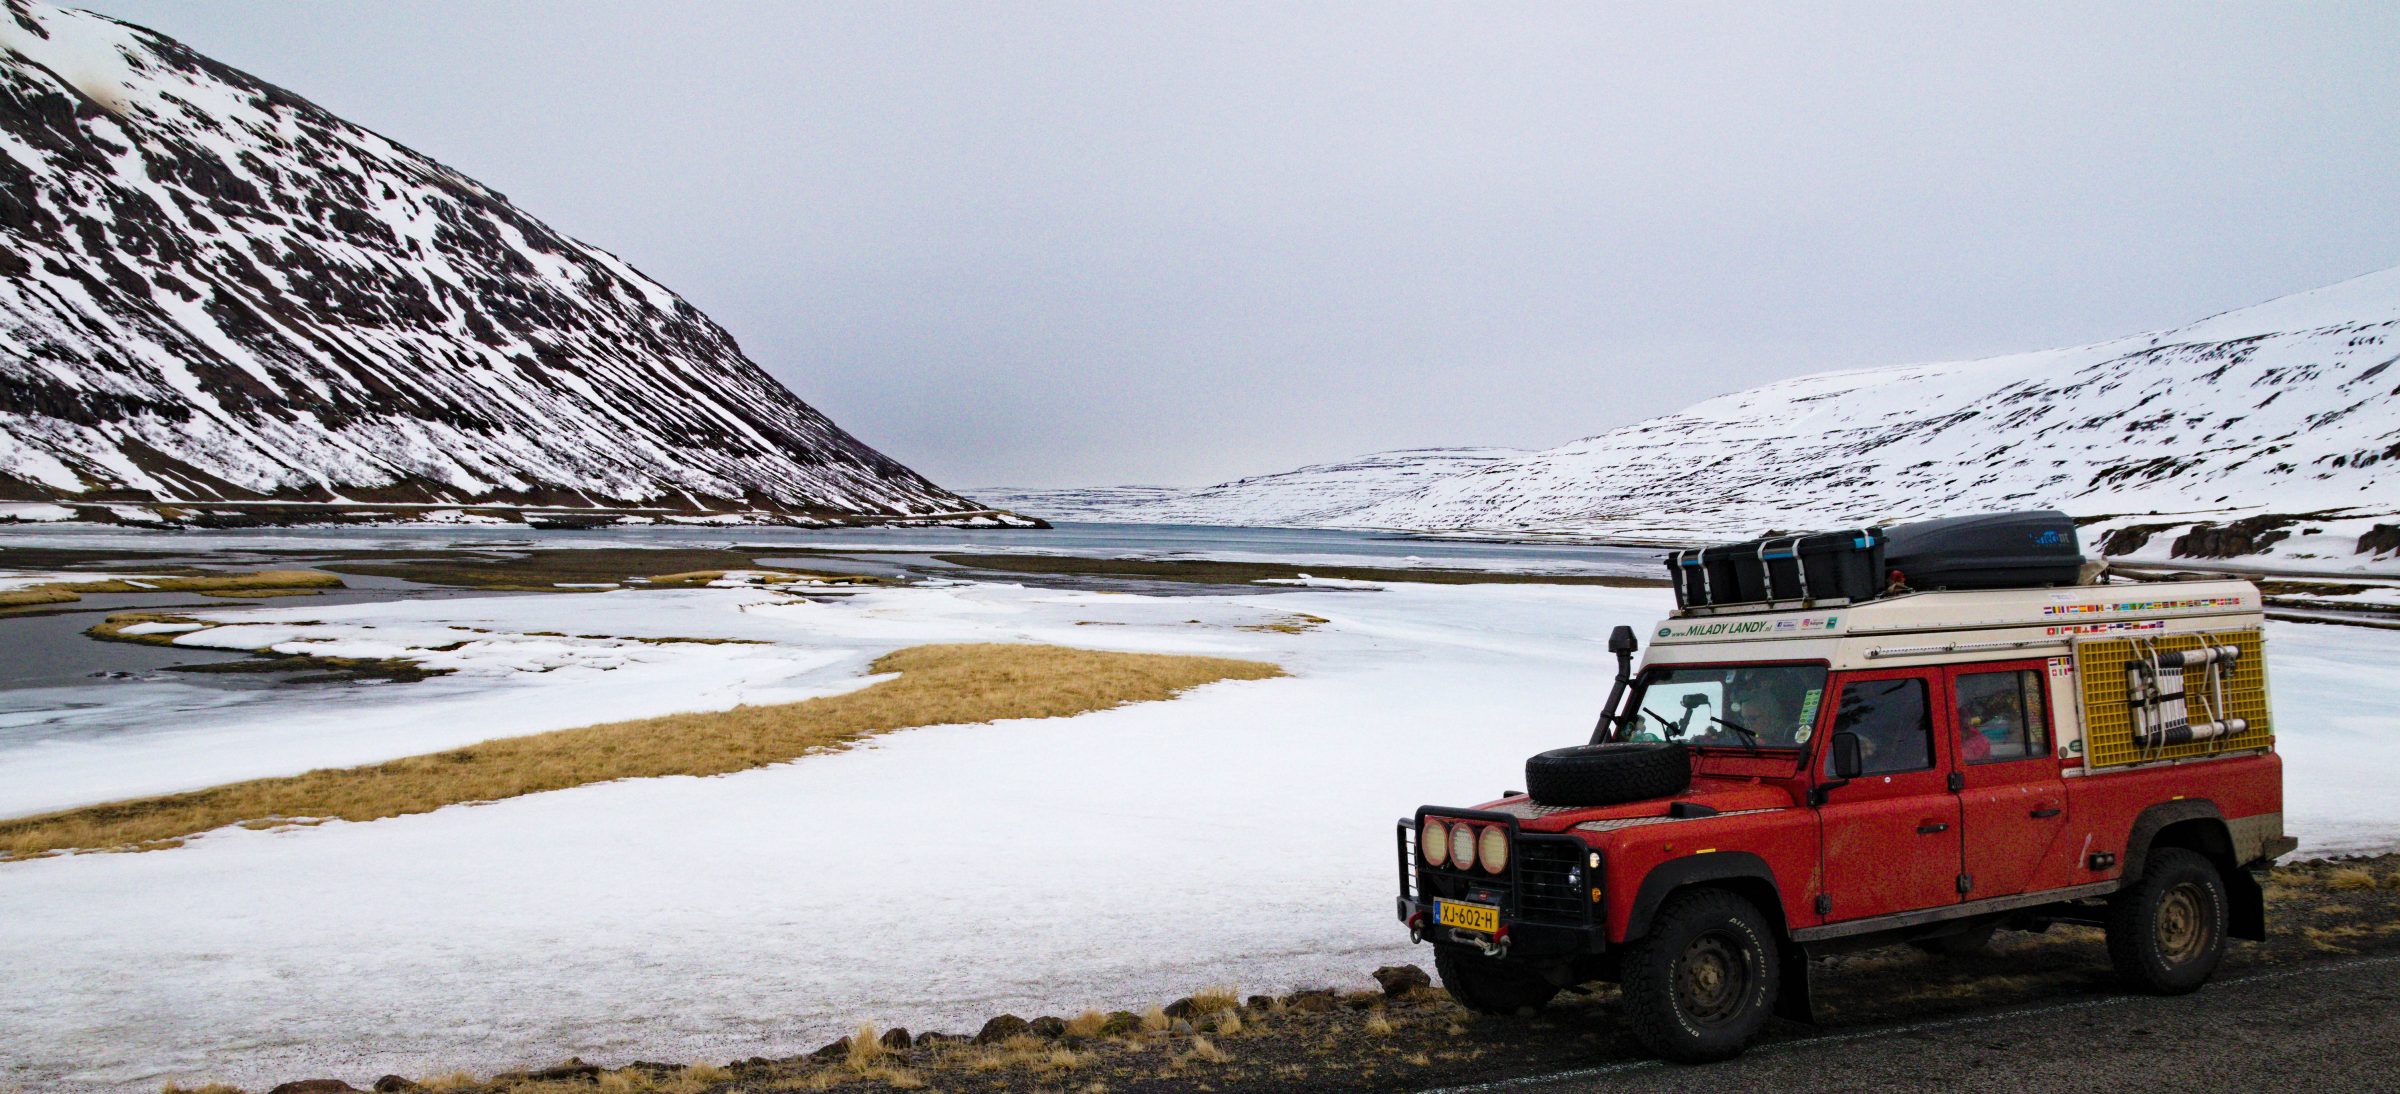 The Milady Landy Landrover in Iceland